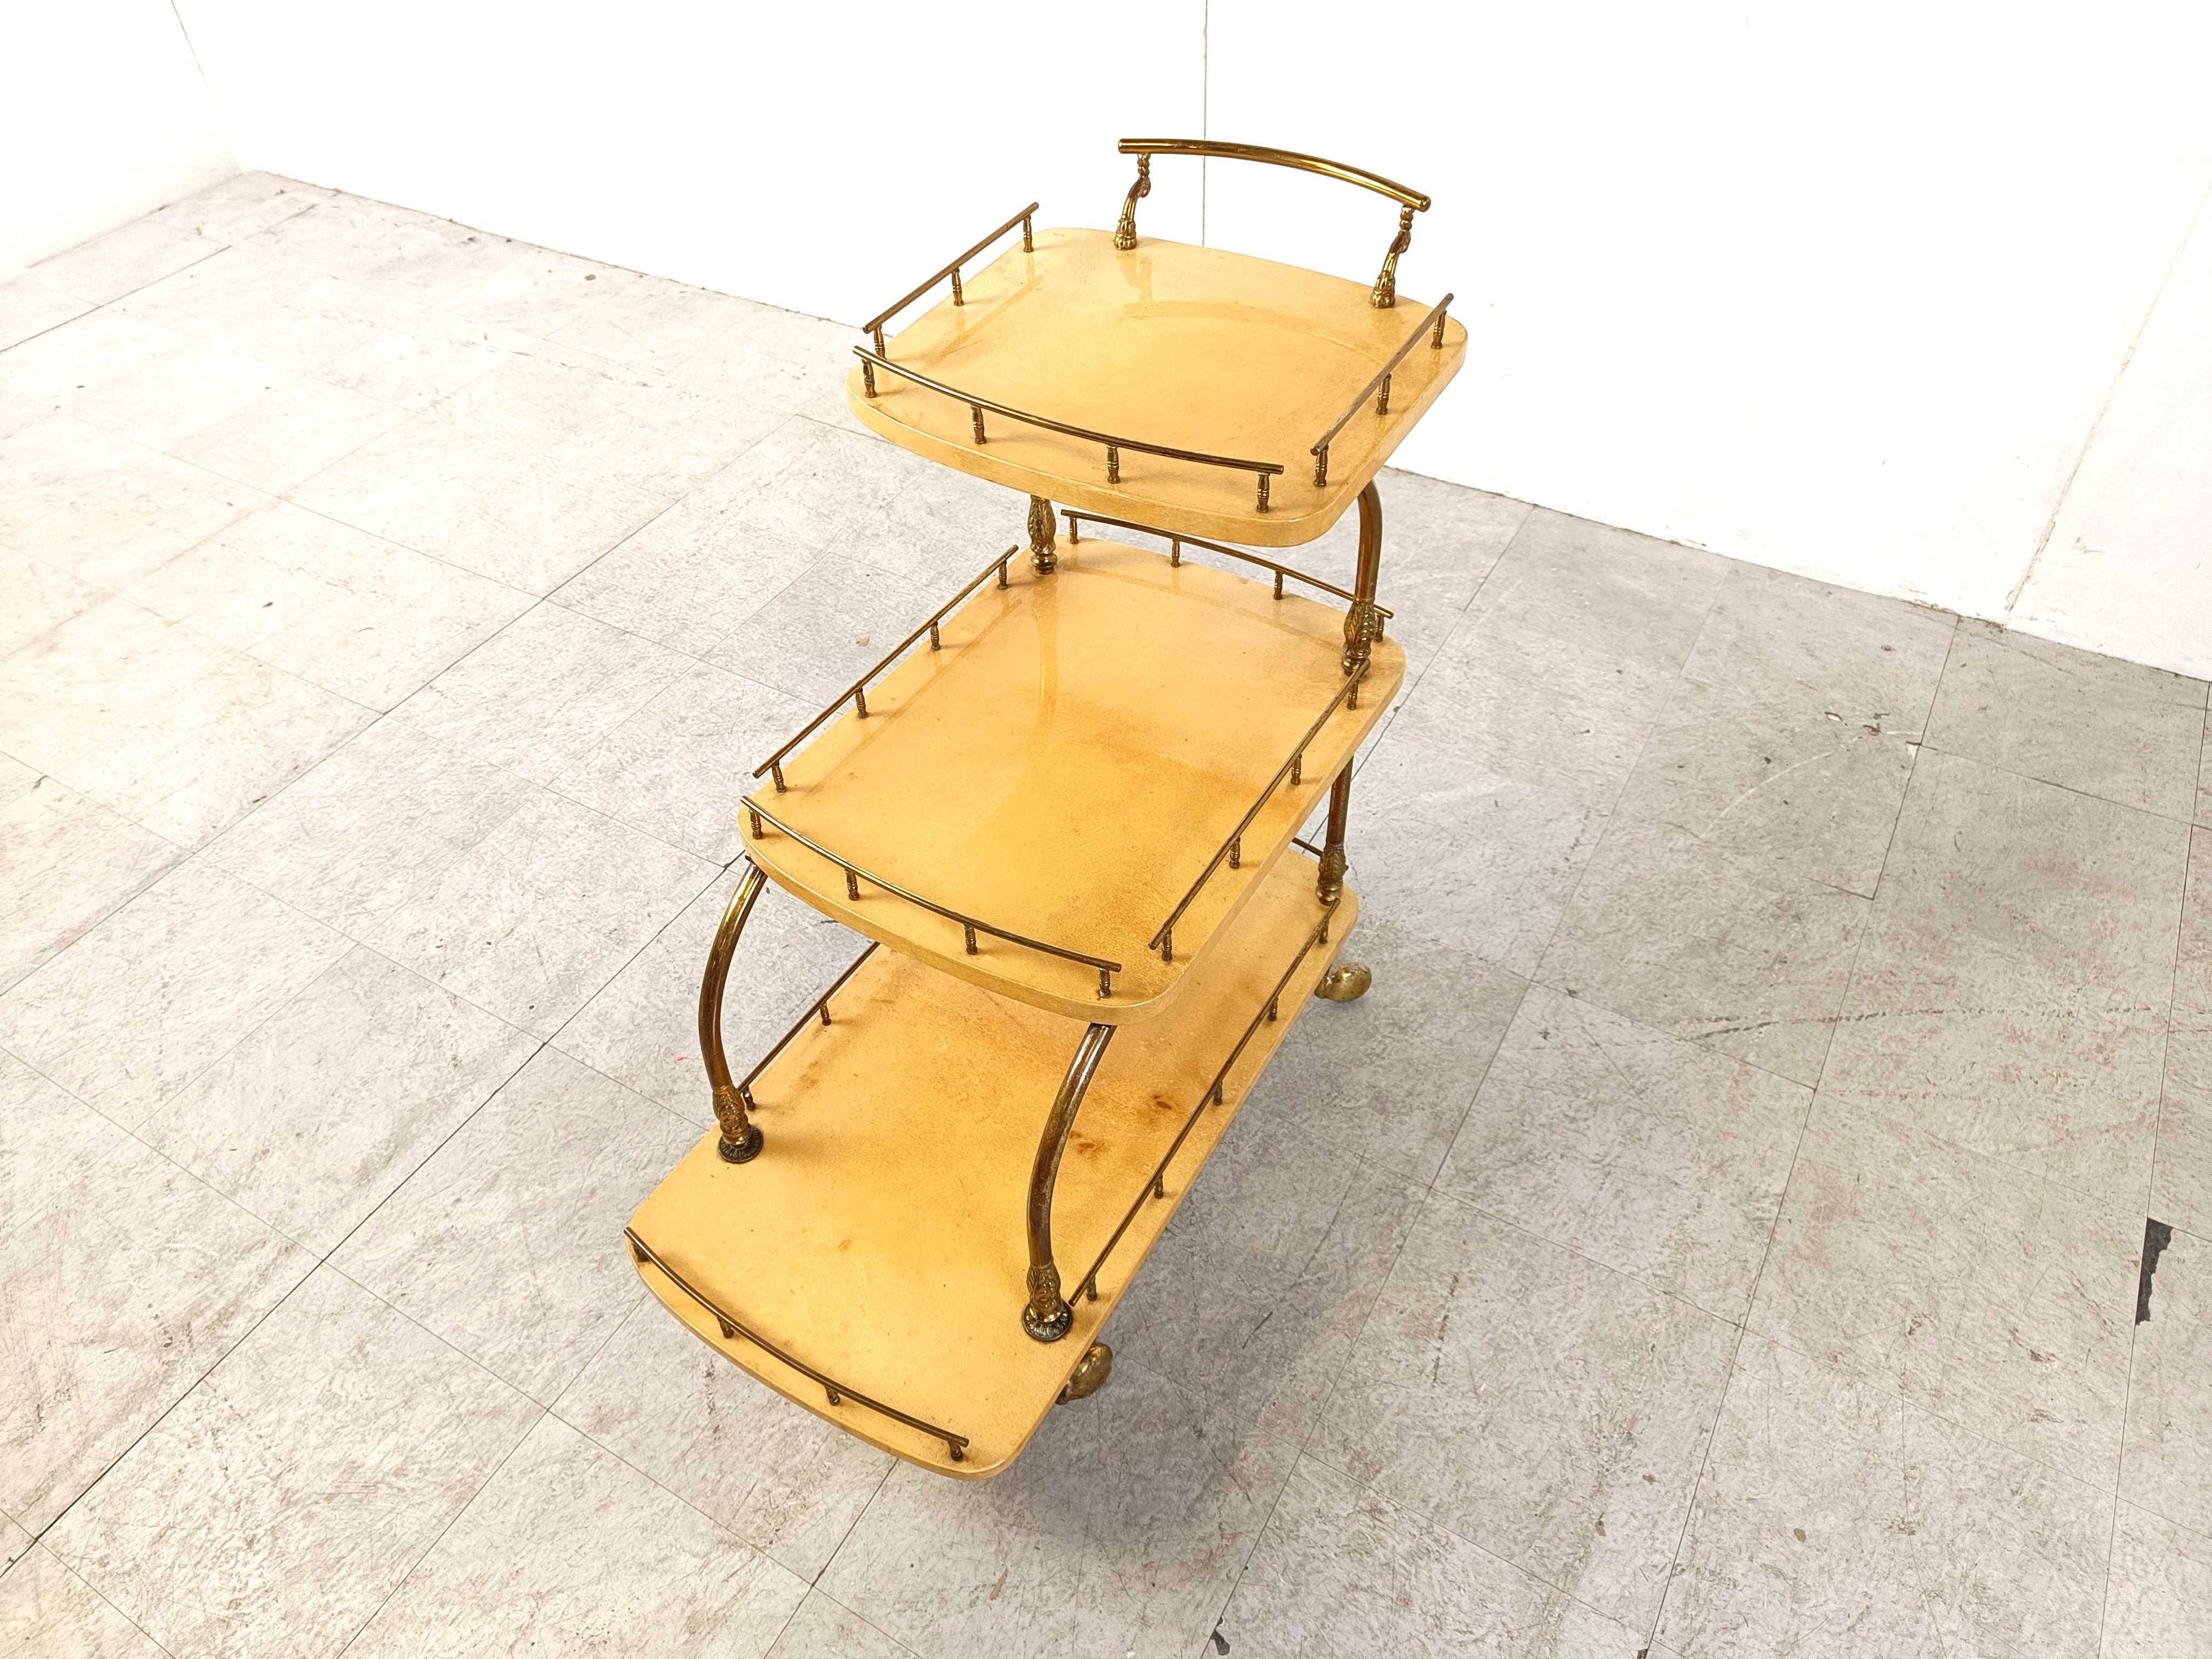 Very unique Aldo Tura Goatskin or parchment bar cart. This bar cart was made in Italy in the 1960s. 

Constructed of thickly lacquered goatskin / parchment and gilt metal hardware. 

Perfect bar or serving cart, or as rolling storage in an